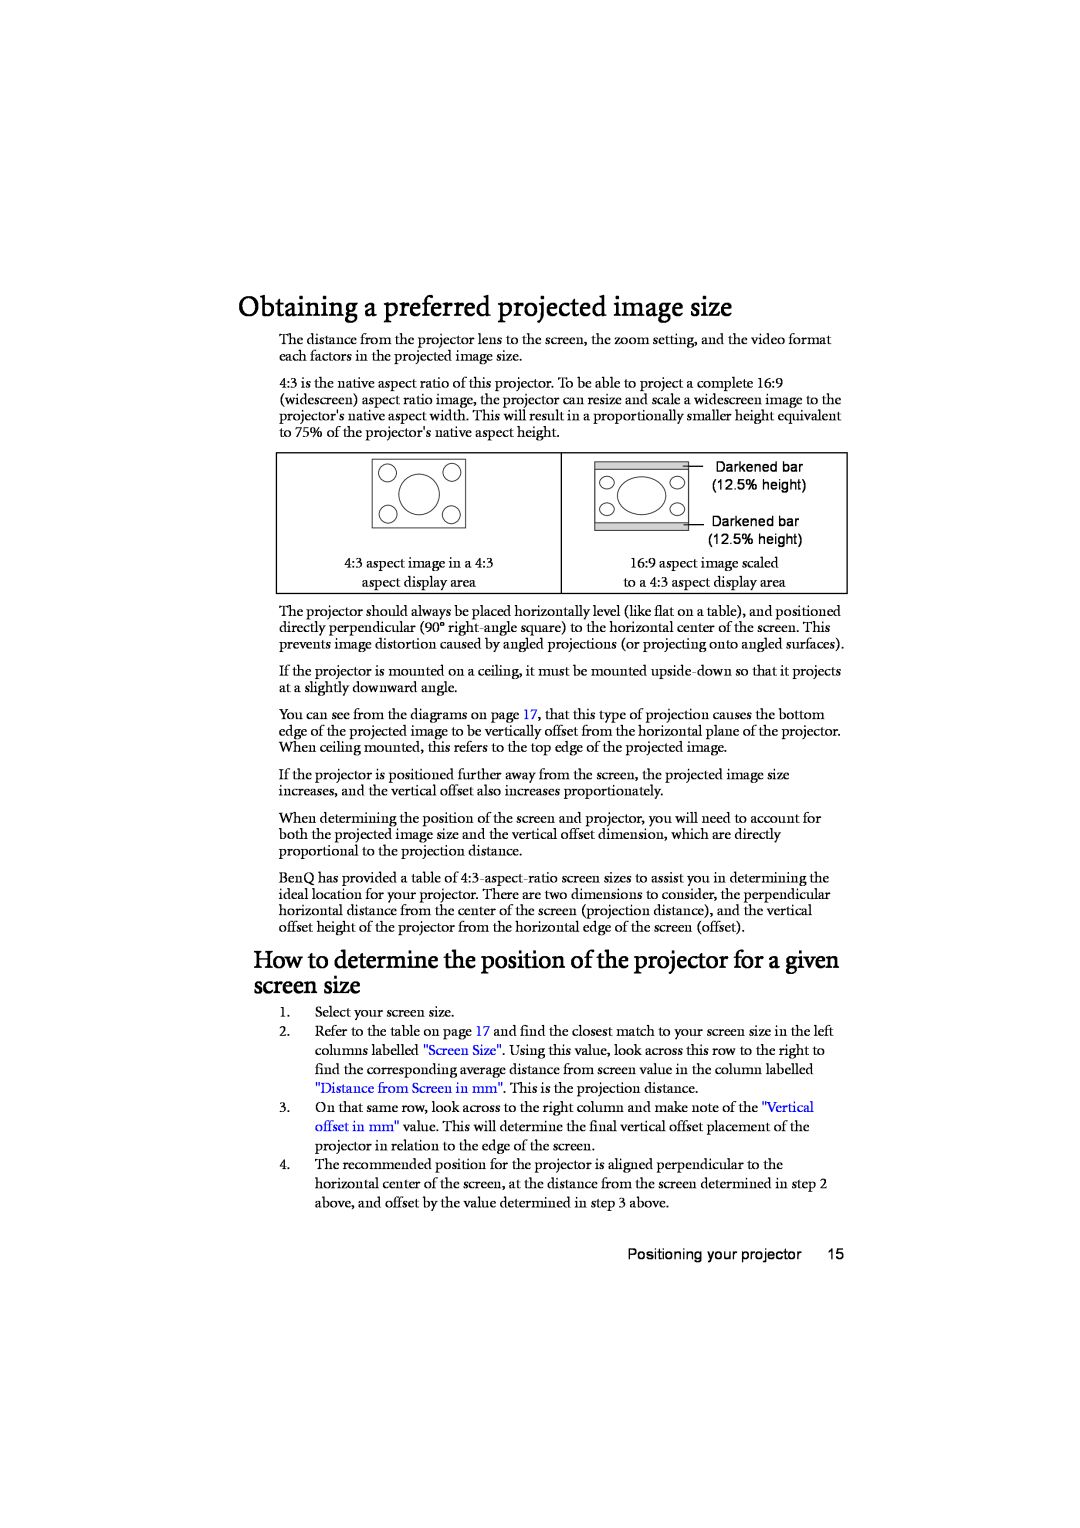 BenQ MP776 ST user manual Obtaining a preferred projected image size 